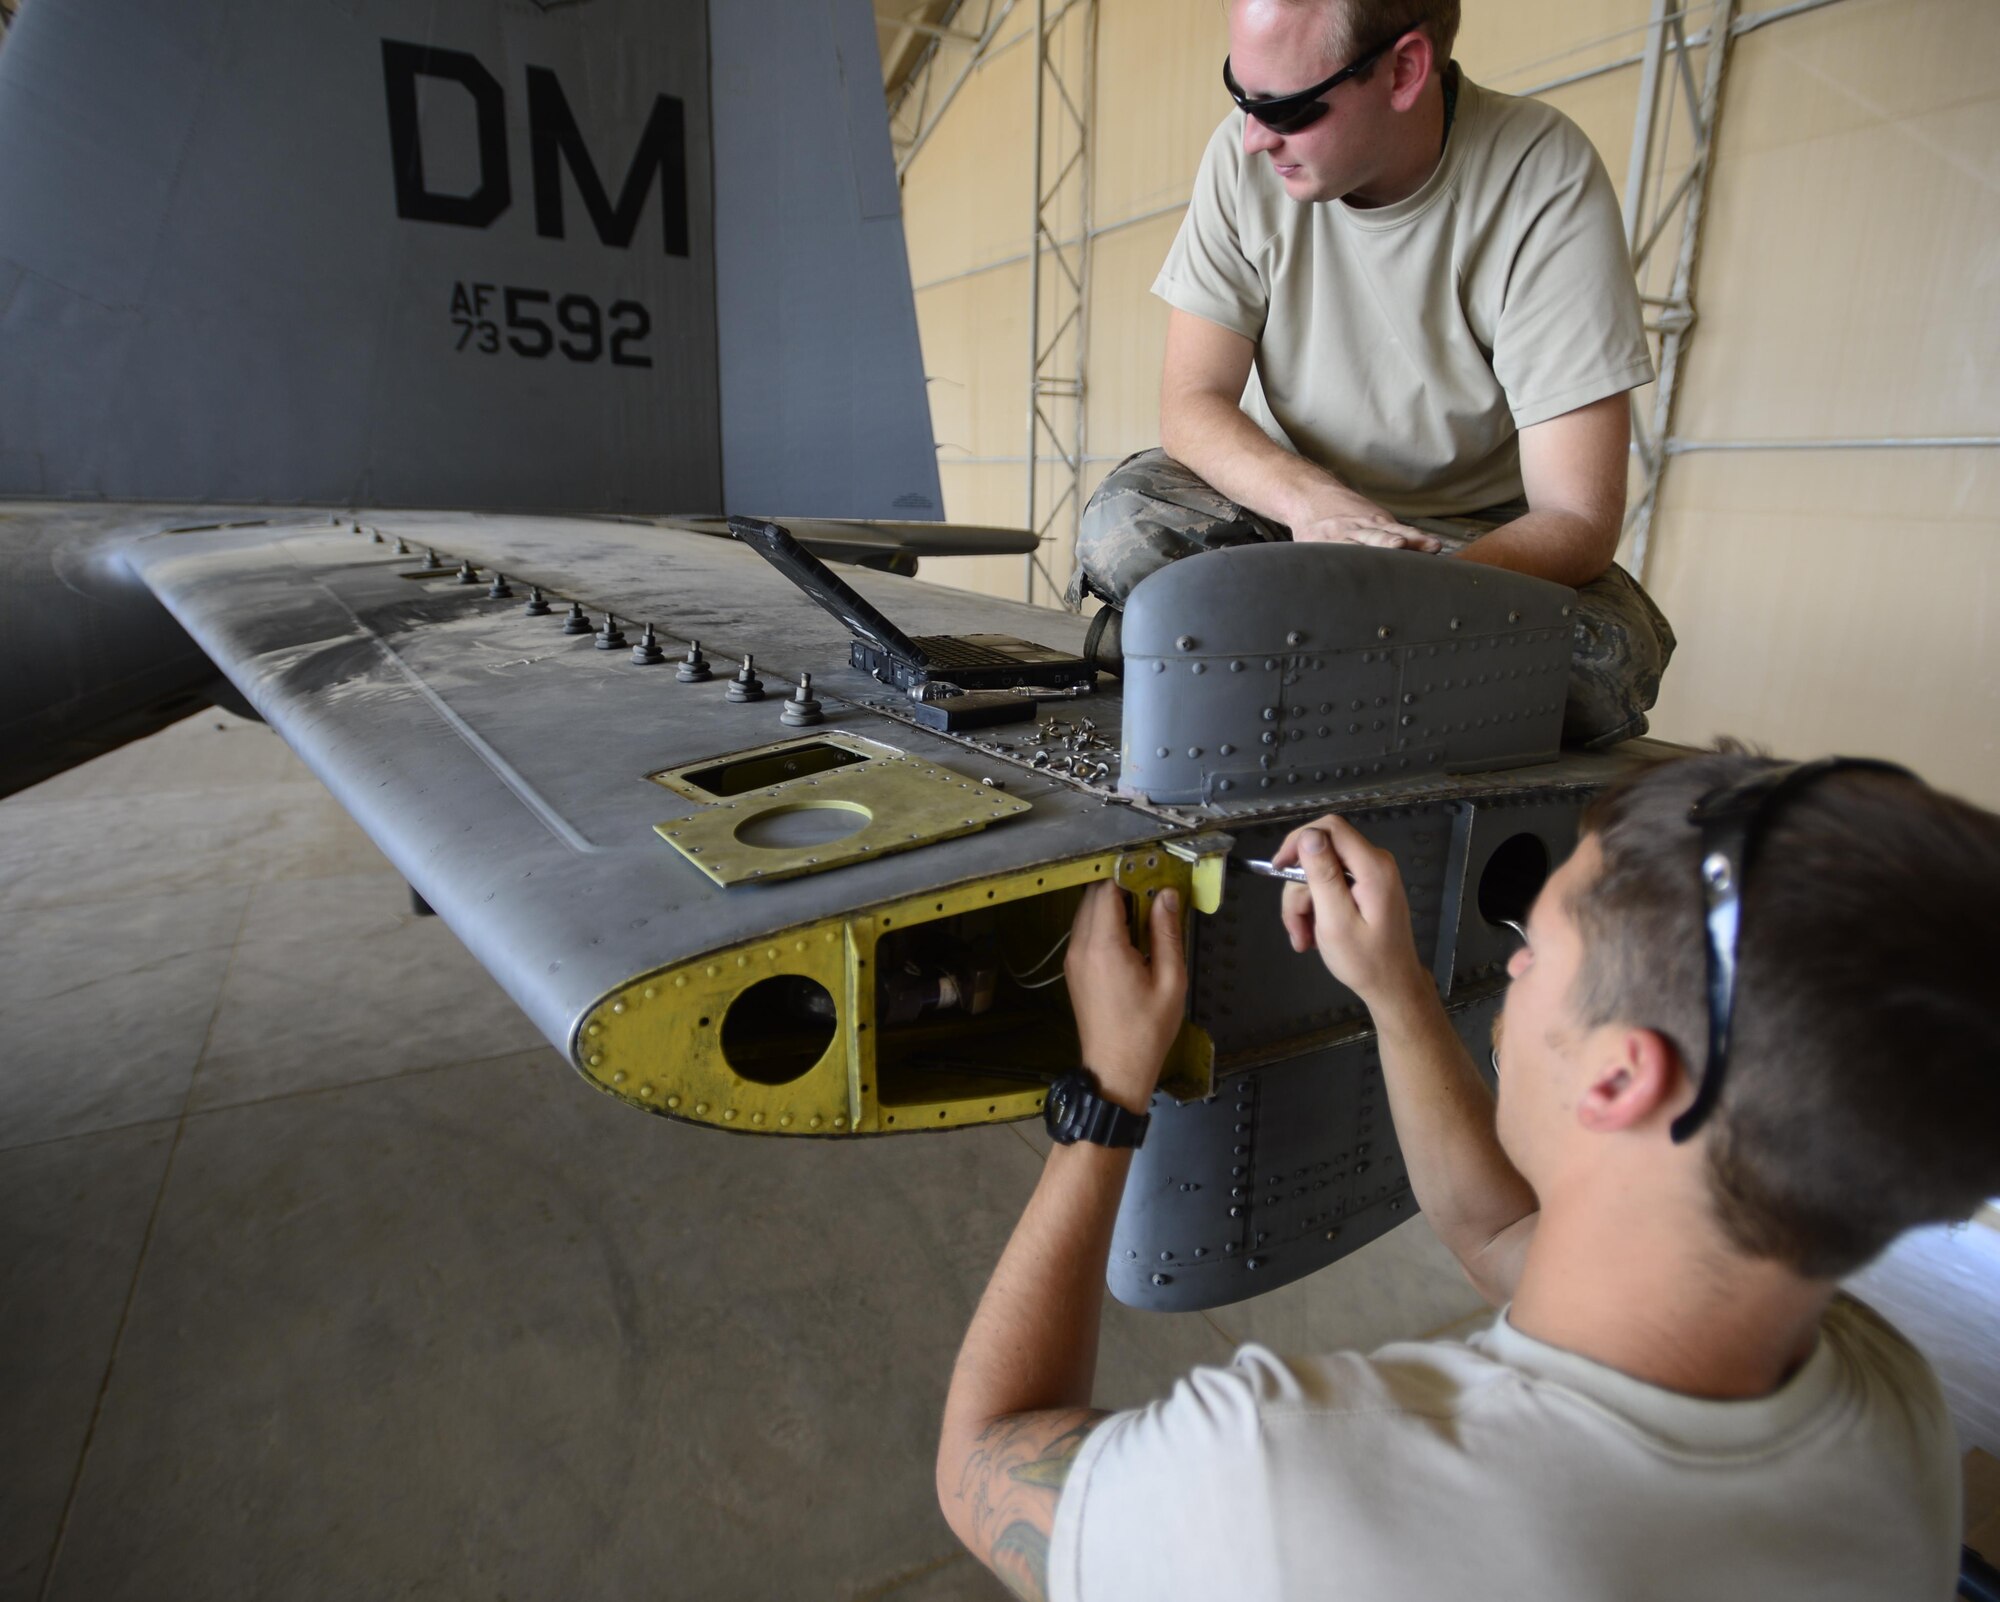 U.S. Air Force Senior Airman Christopher Lamb, 386th Expeditionary Aircraft Maintenance Squadron aerospace maintenance operator, tightens a bolt while Staff Sgt. Sean Jones, 386th EAMXS aerospace maintenance craftsman, reviews the training operating manual at an undisclosed location in Southwest Asia, Sept. 25, 2015. Maintainers perform regular inspections and preventative measures on aircraft to enhance Operation Inherent Resolve mission capabilities. (U.S. Air Force photo by Senior Airman Racheal E. Watson/Released)